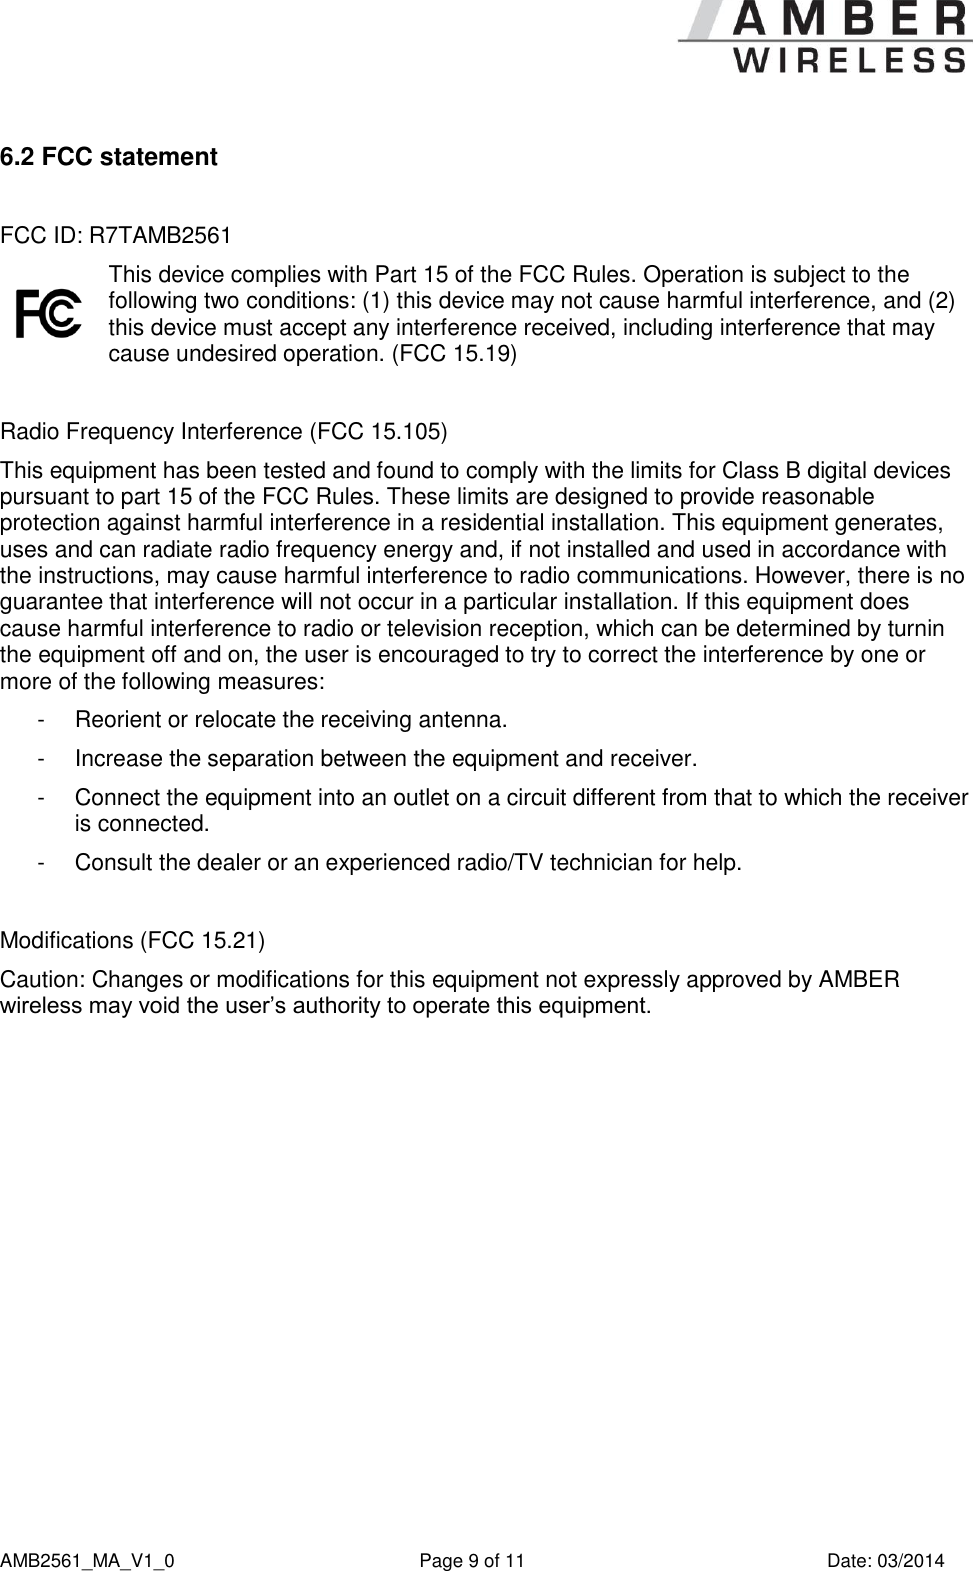      AMB2561_MA_V1_0  Page 9 of 11  Date: 03/2014 6.2 FCC statement   FCC ID: R7TAMB2561  This device complies with Part 15 of the FCC Rules. Operation is subject to the following two conditions: (1) this device may not cause harmful interference, and (2) this device must accept any interference received, including interference that may cause undesired operation. (FCC 15.19)  Radio Frequency Interference (FCC 15.105) This equipment has been tested and found to comply with the limits for Class B digital devices pursuant to part 15 of the FCC Rules. These limits are designed to provide reasonable protection against harmful interference in a residential installation. This equipment generates, uses and can radiate radio frequency energy and, if not installed and used in accordance with the instructions, may cause harmful interference to radio communications. However, there is no guarantee that interference will not occur in a particular installation. If this equipment does cause harmful interference to radio or television reception, which can be determined by turnin the equipment off and on, the user is encouraged to try to correct the interference by one or more of the following measures: -  Reorient or relocate the receiving antenna. -  Increase the separation between the equipment and receiver. -  Connect the equipment into an outlet on a circuit different from that to which the receiver is connected. -  Consult the dealer or an experienced radio/TV technician for help.  Modifications (FCC 15.21) Caution: Changes or modifications for this equipment not expressly approved by AMBER wireless may void the user’s authority to operate this equipment.   